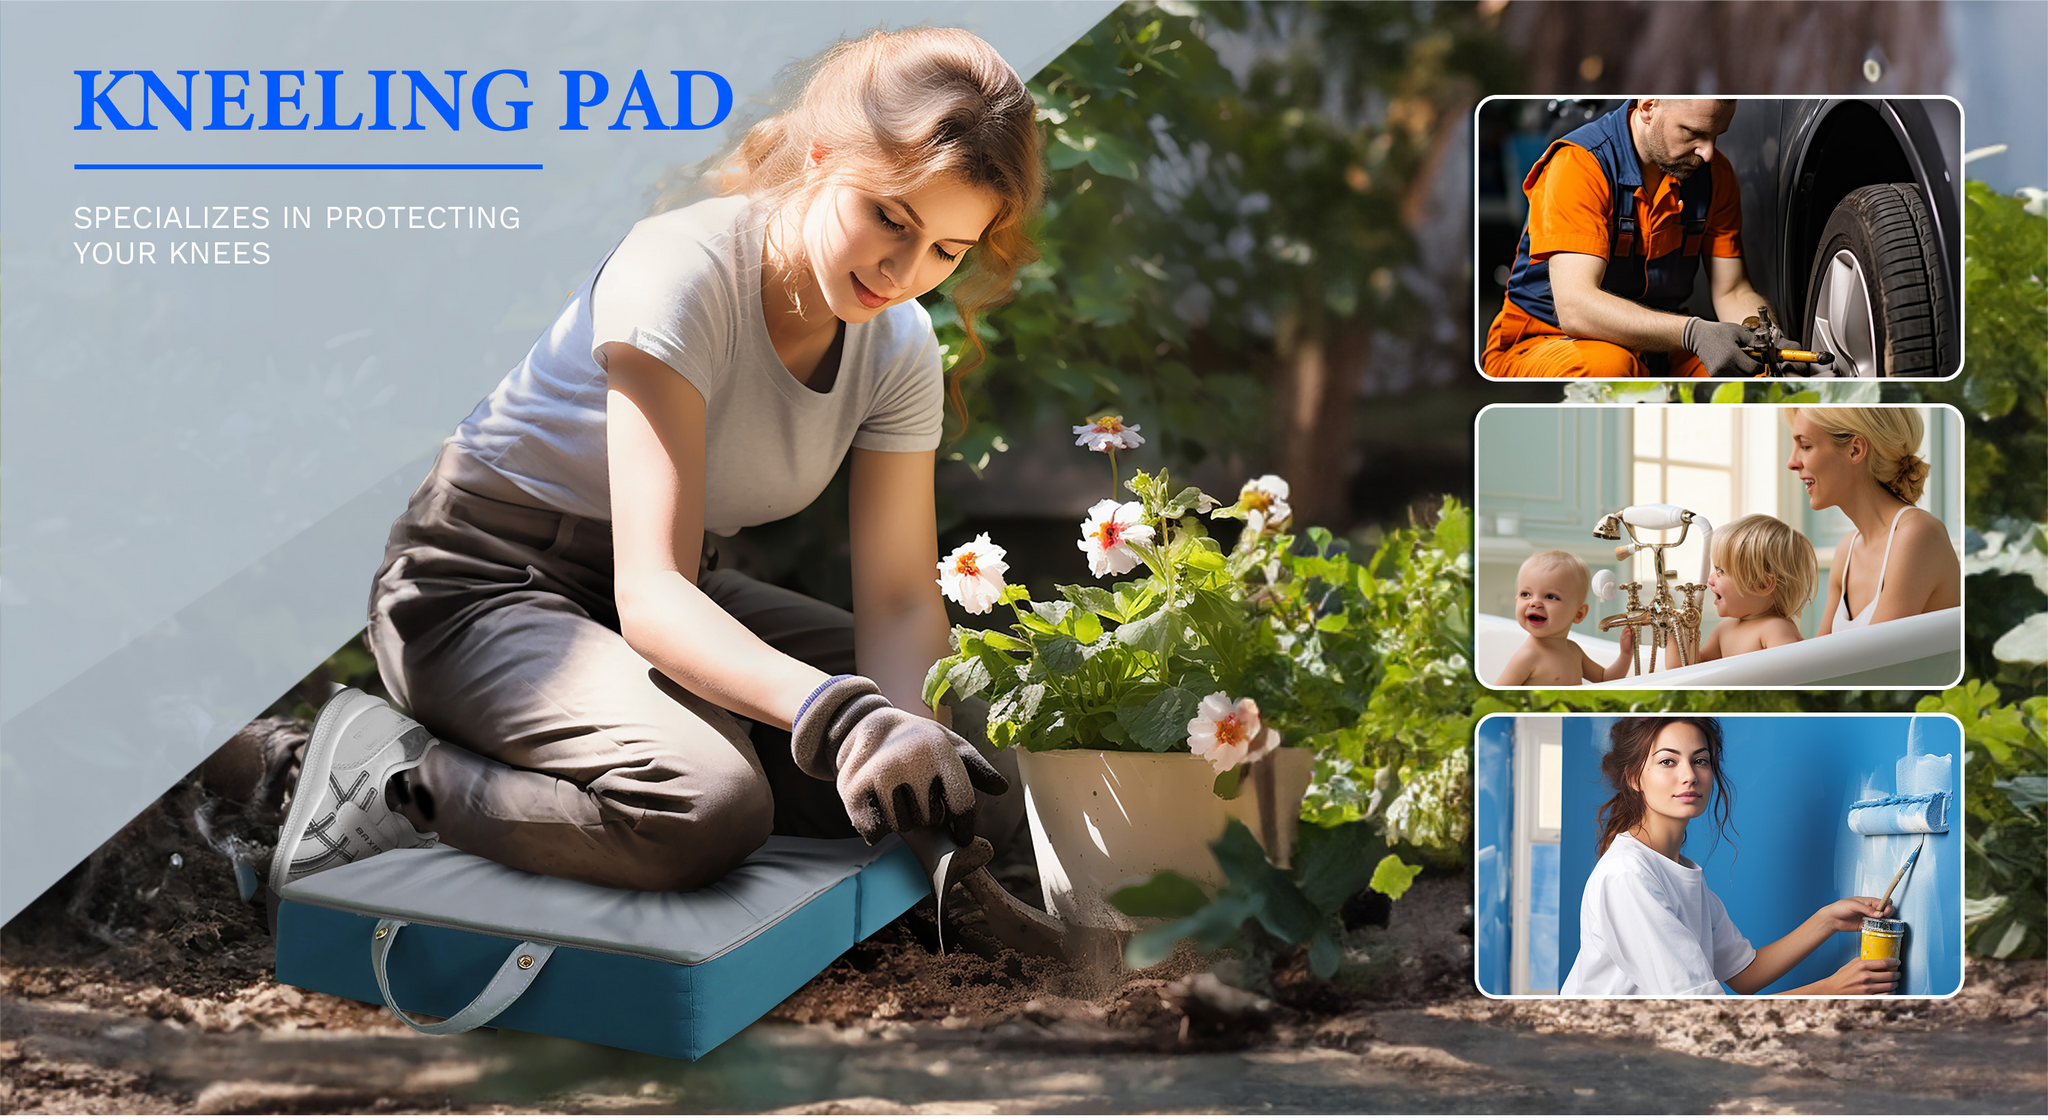 Daneey Waterproof Foam Extra Thick Kneeling Mat Pad is a perfect tool for gardeners and contractors. With waterproof features, it provides extra thick cushion for your knees to protect against hard and cold surfaces. Perfect for any outdoor activities and jobs.